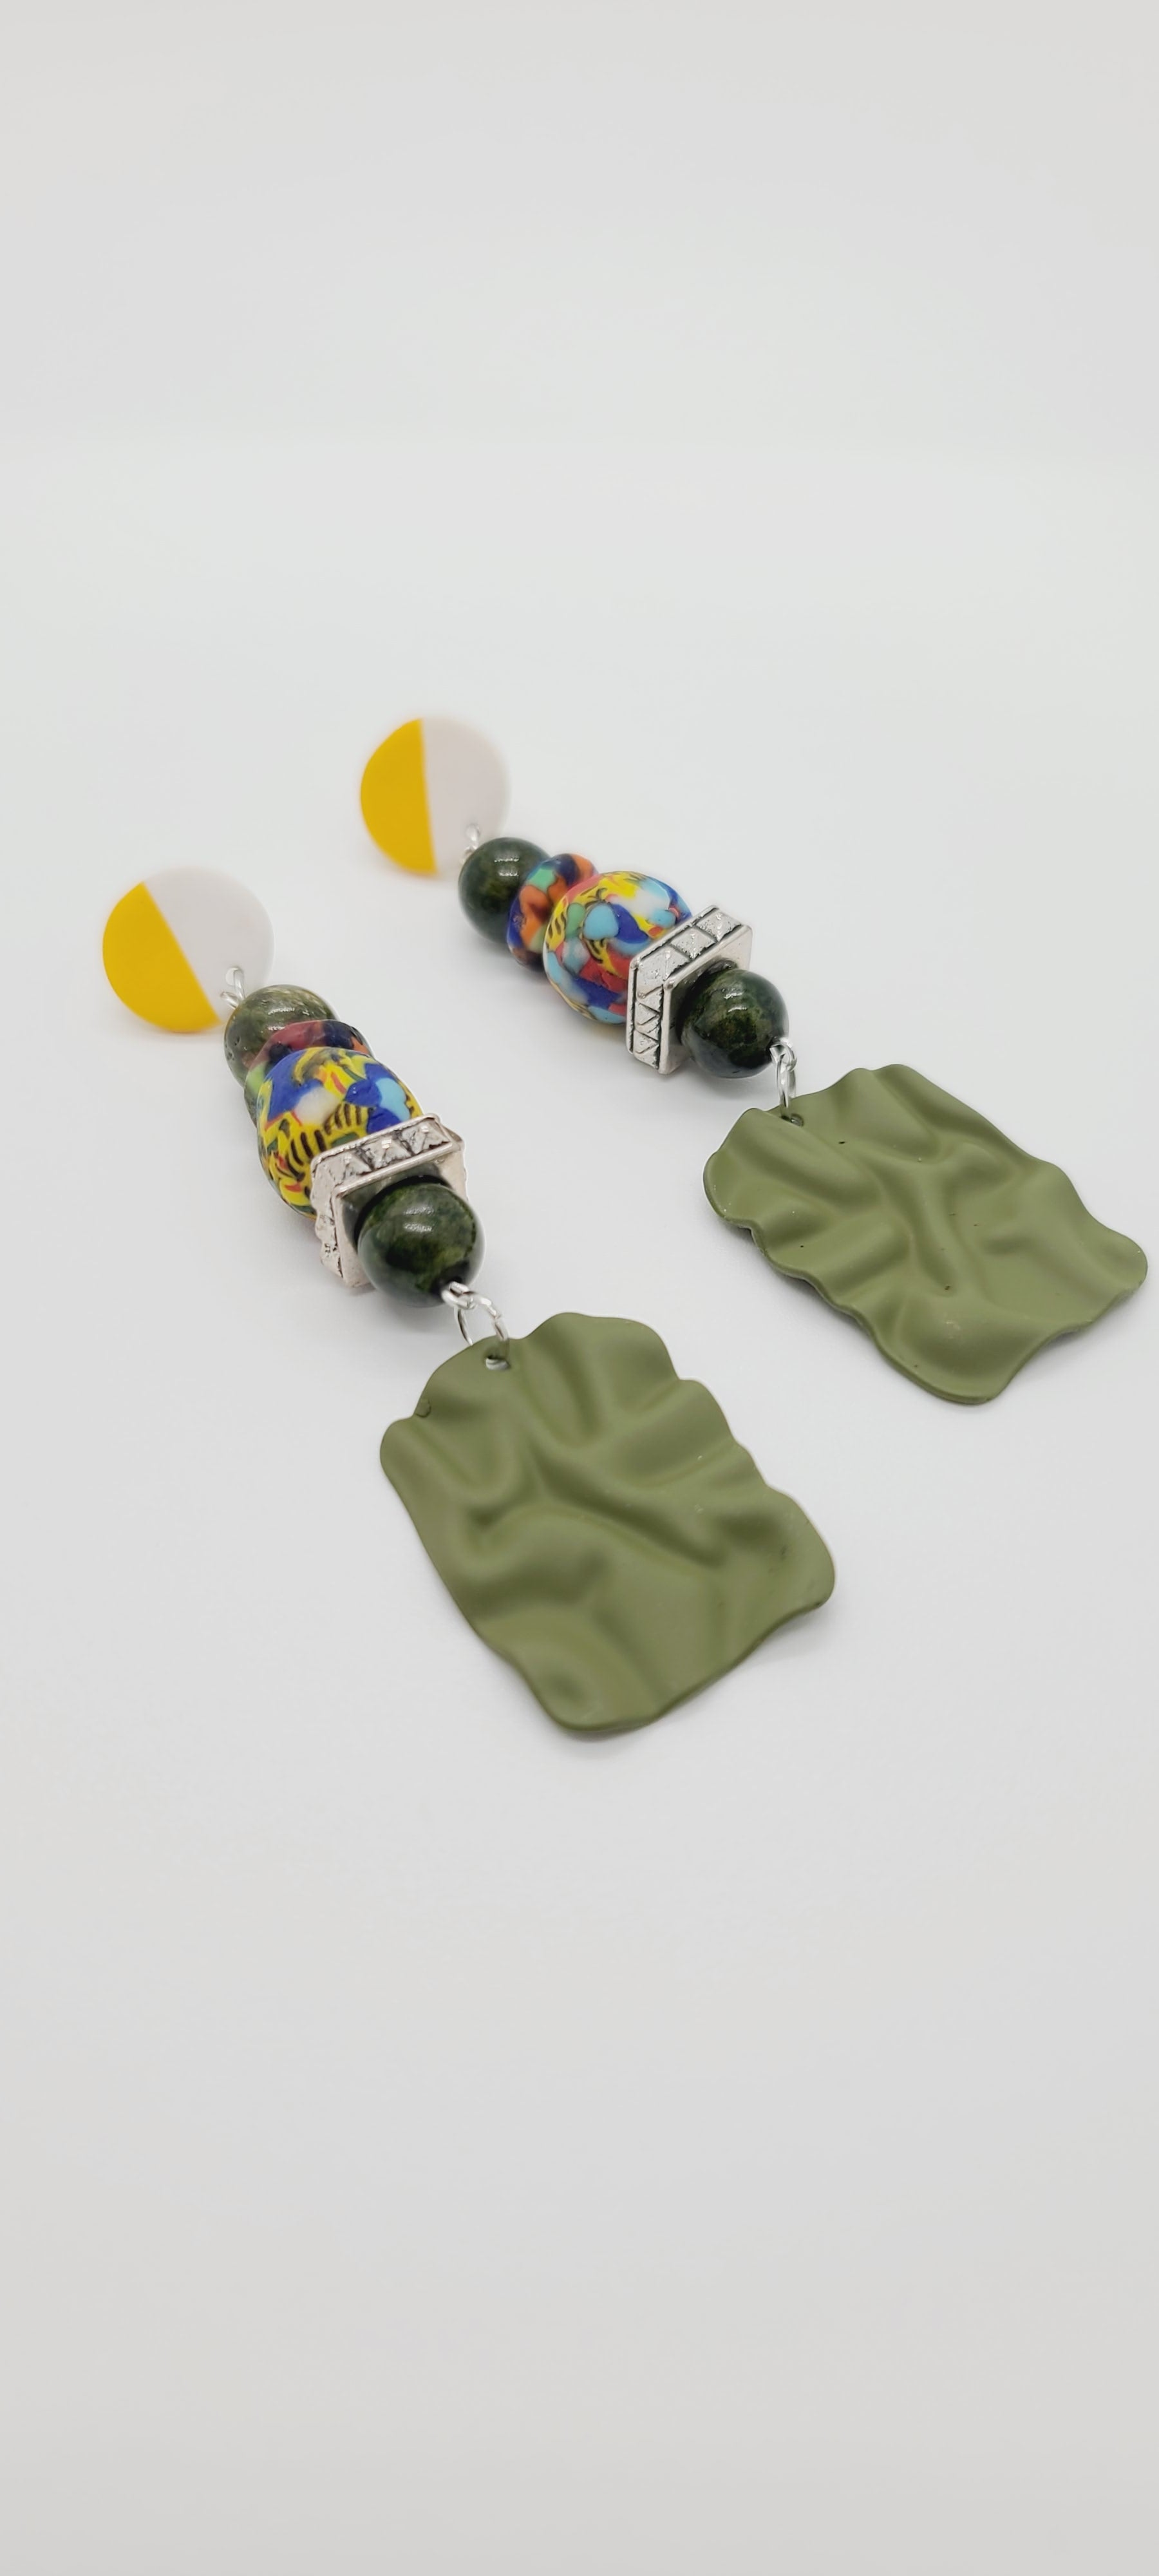 Length: 3.5 inches | Weight: 1.1 ounces  Distinctly You! These yellow and white ceramic post earrings are made with olive green rubbered metal charms, 10mm olive green Agate atones, 14mm house medley Ghana glass beads and rondelles, and silver squared rondelles.